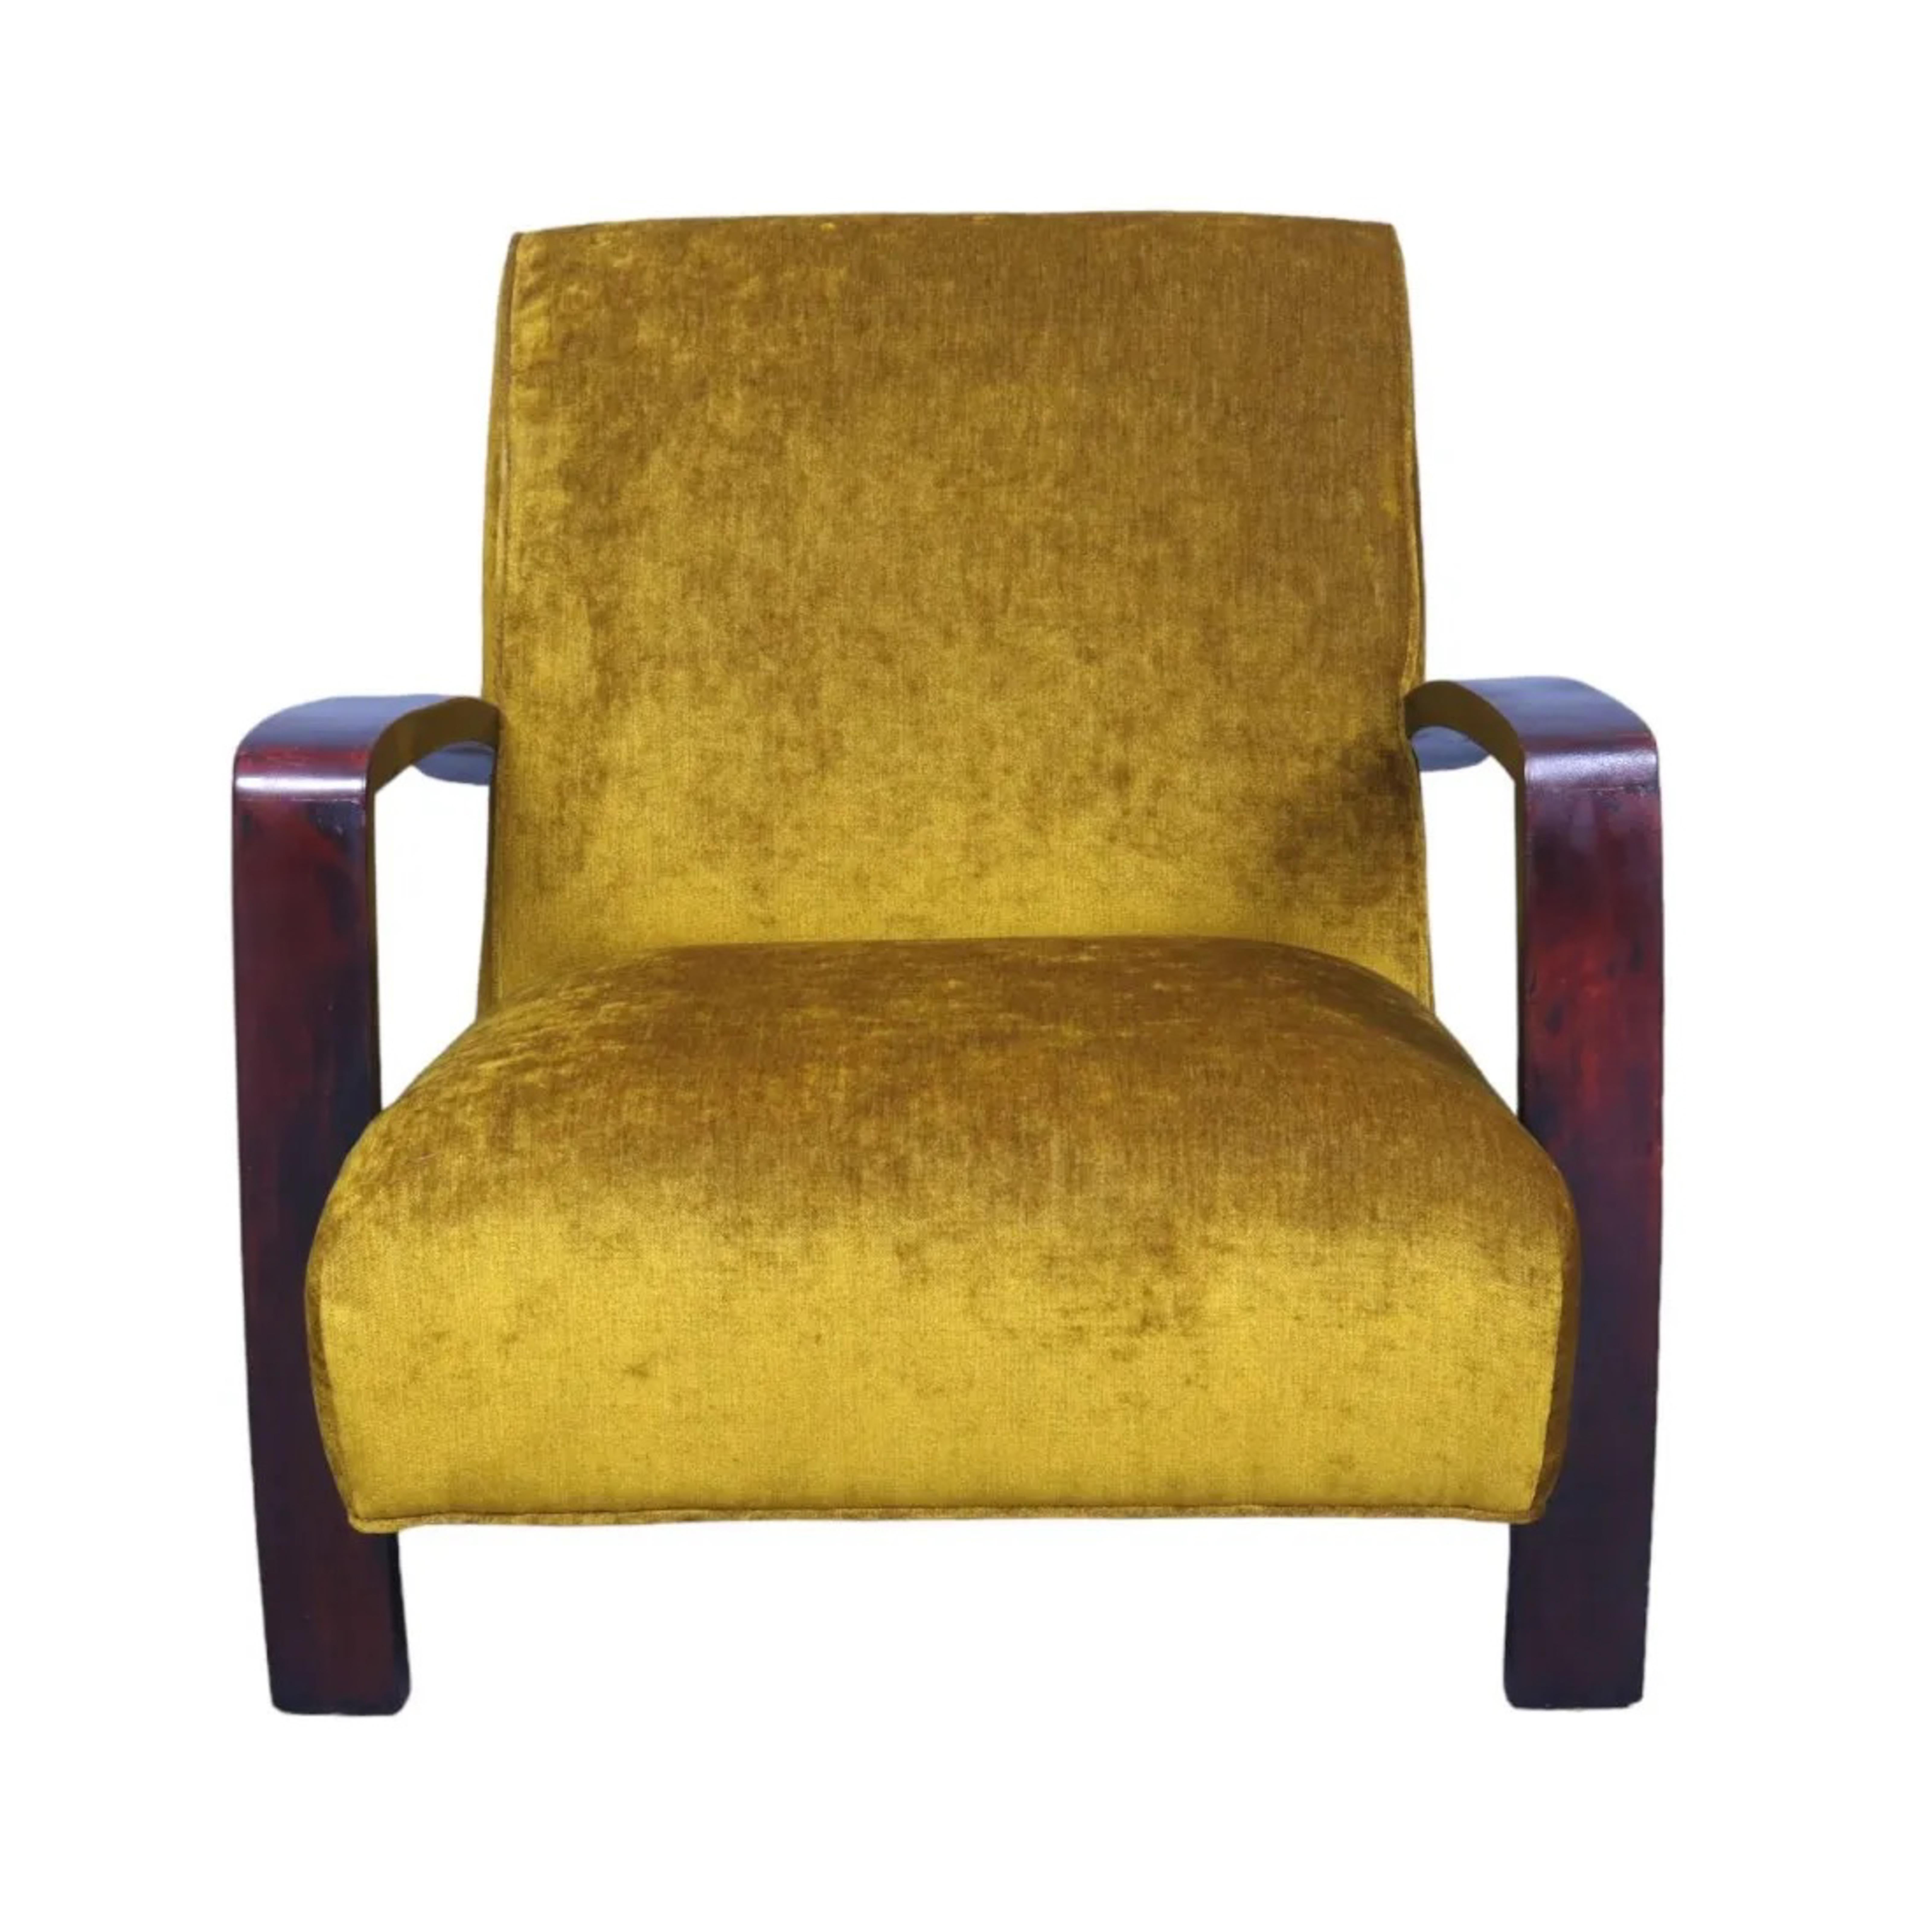 Mid-Century curated Swedish long chair 1960's

Dimensions:
W27xD27XH34 inches
Seat Height 17in
Arm Height 24in

Condition:
very good completely restored
new upholstery 